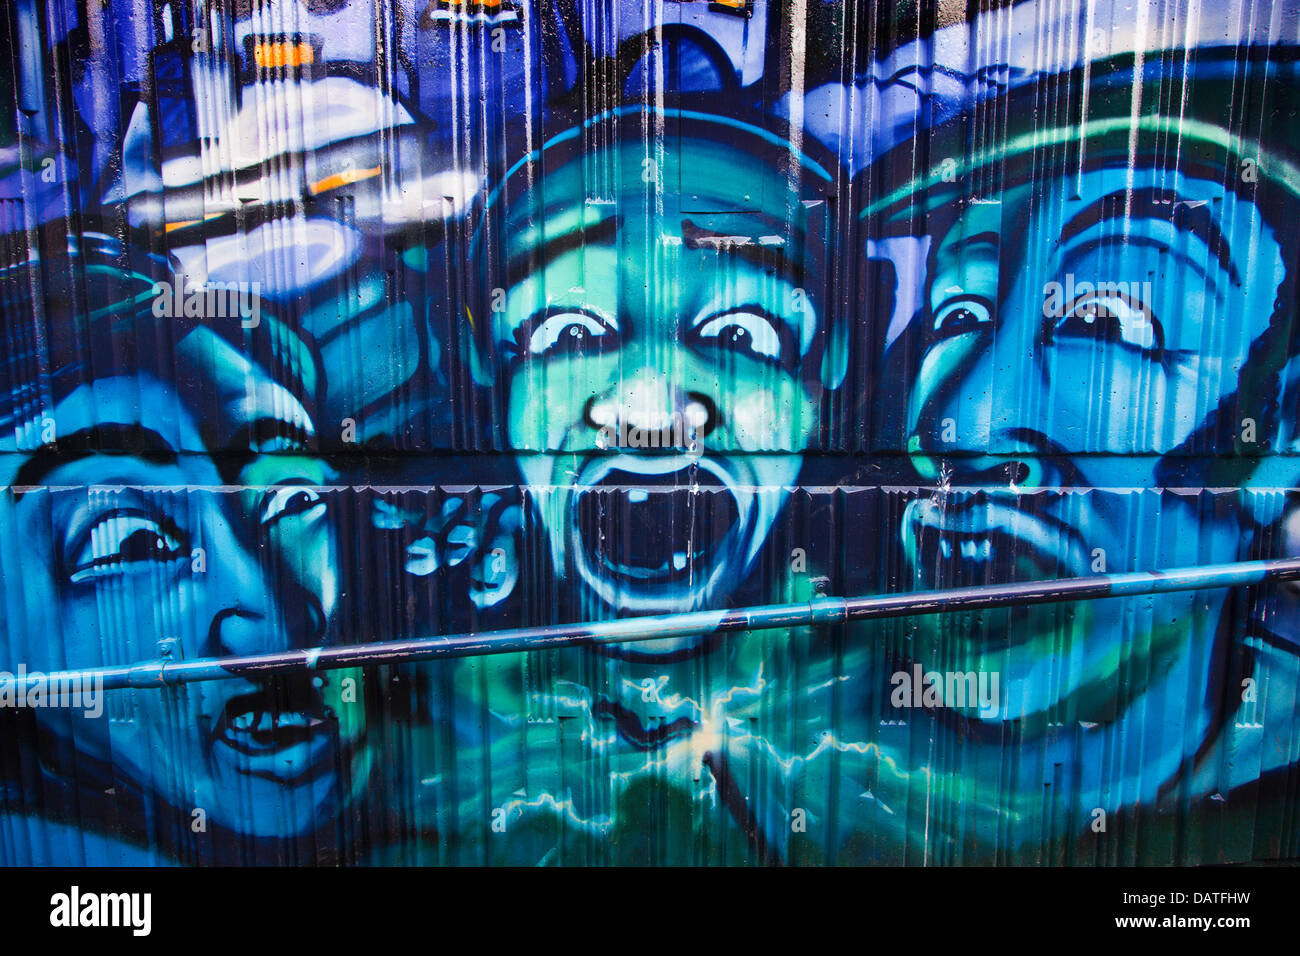 Street art painting of heads with their mouths open sprayed onto subway wall at Sunbury Cross, Surrey, UK. Stock Photo